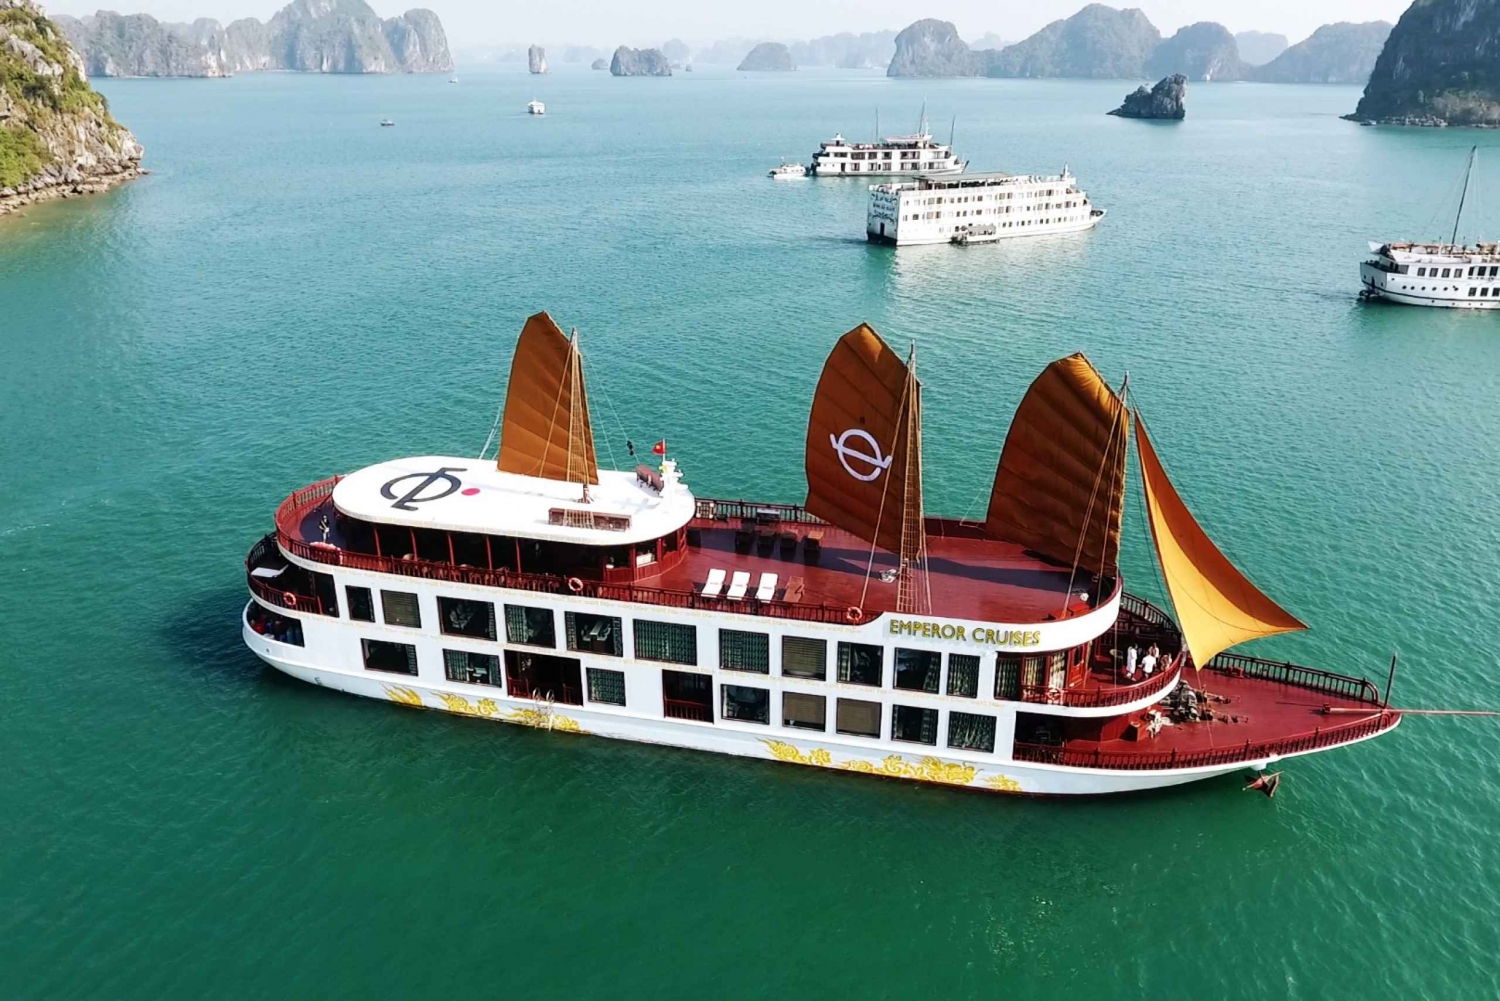 Halong Bay: 2 Days 1 Night Experience on Emperor Cruise